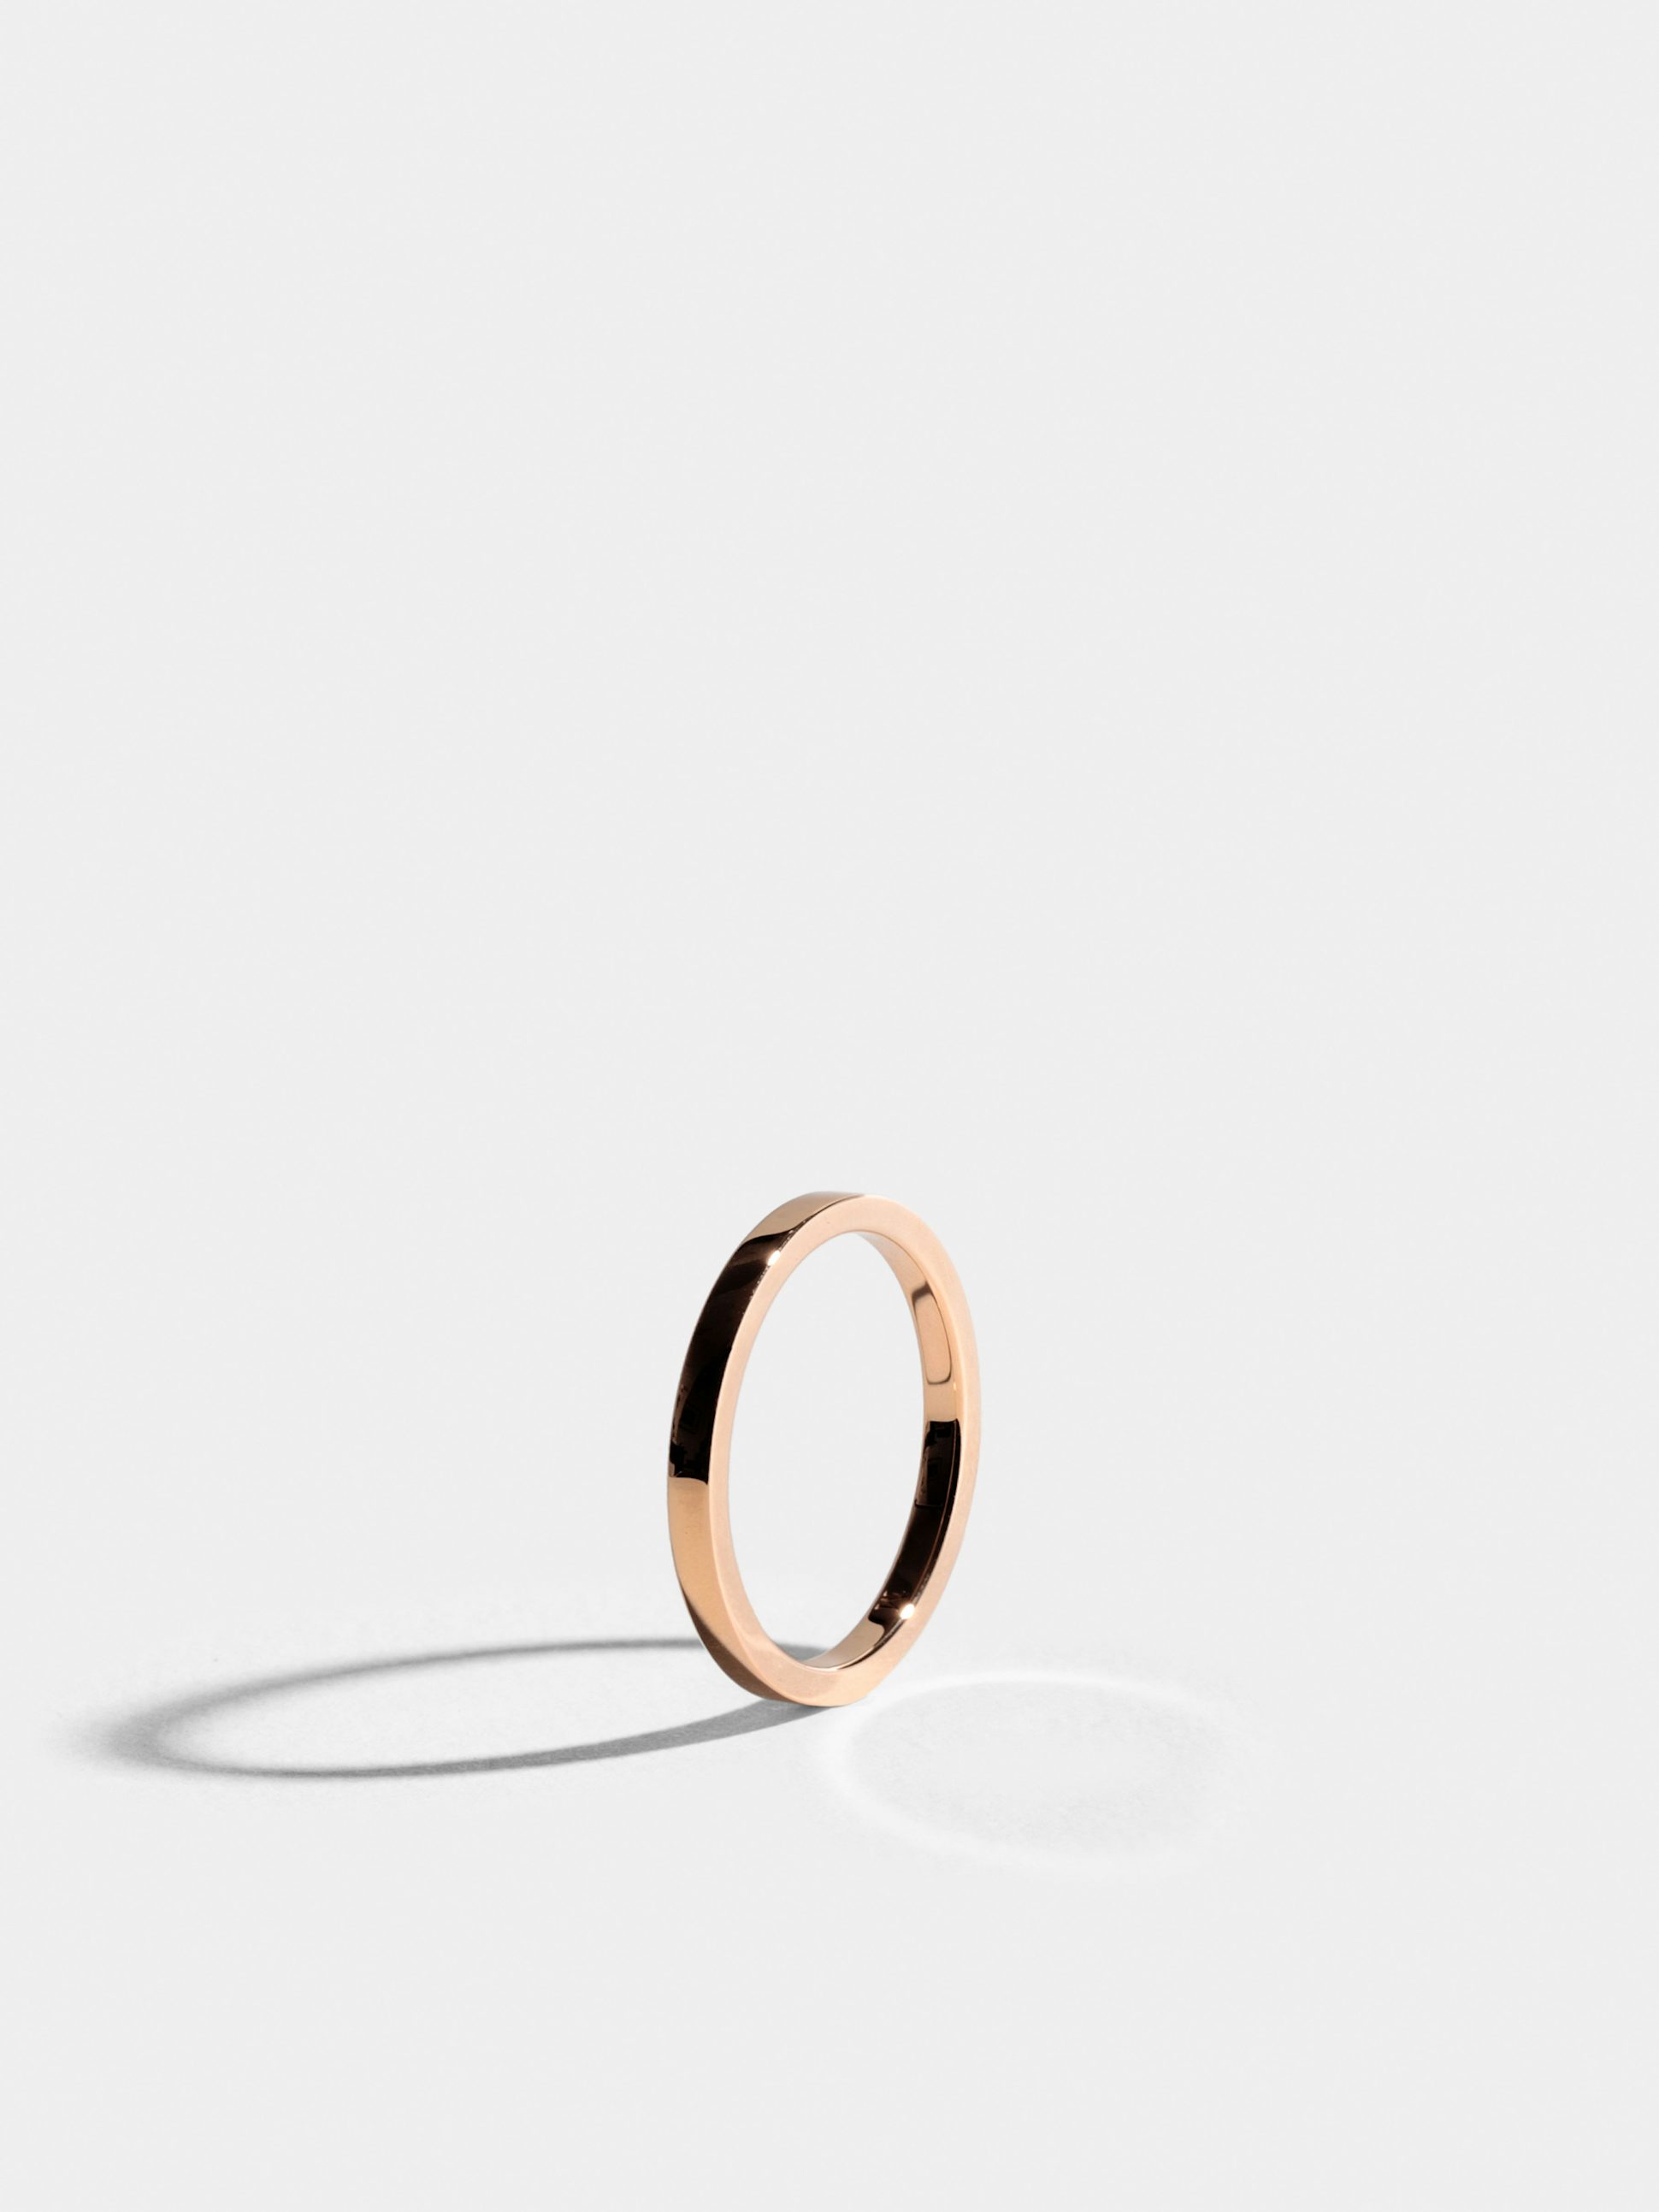 Anagramme flat ribbon ring in 18k Fairmined ethical rose gold